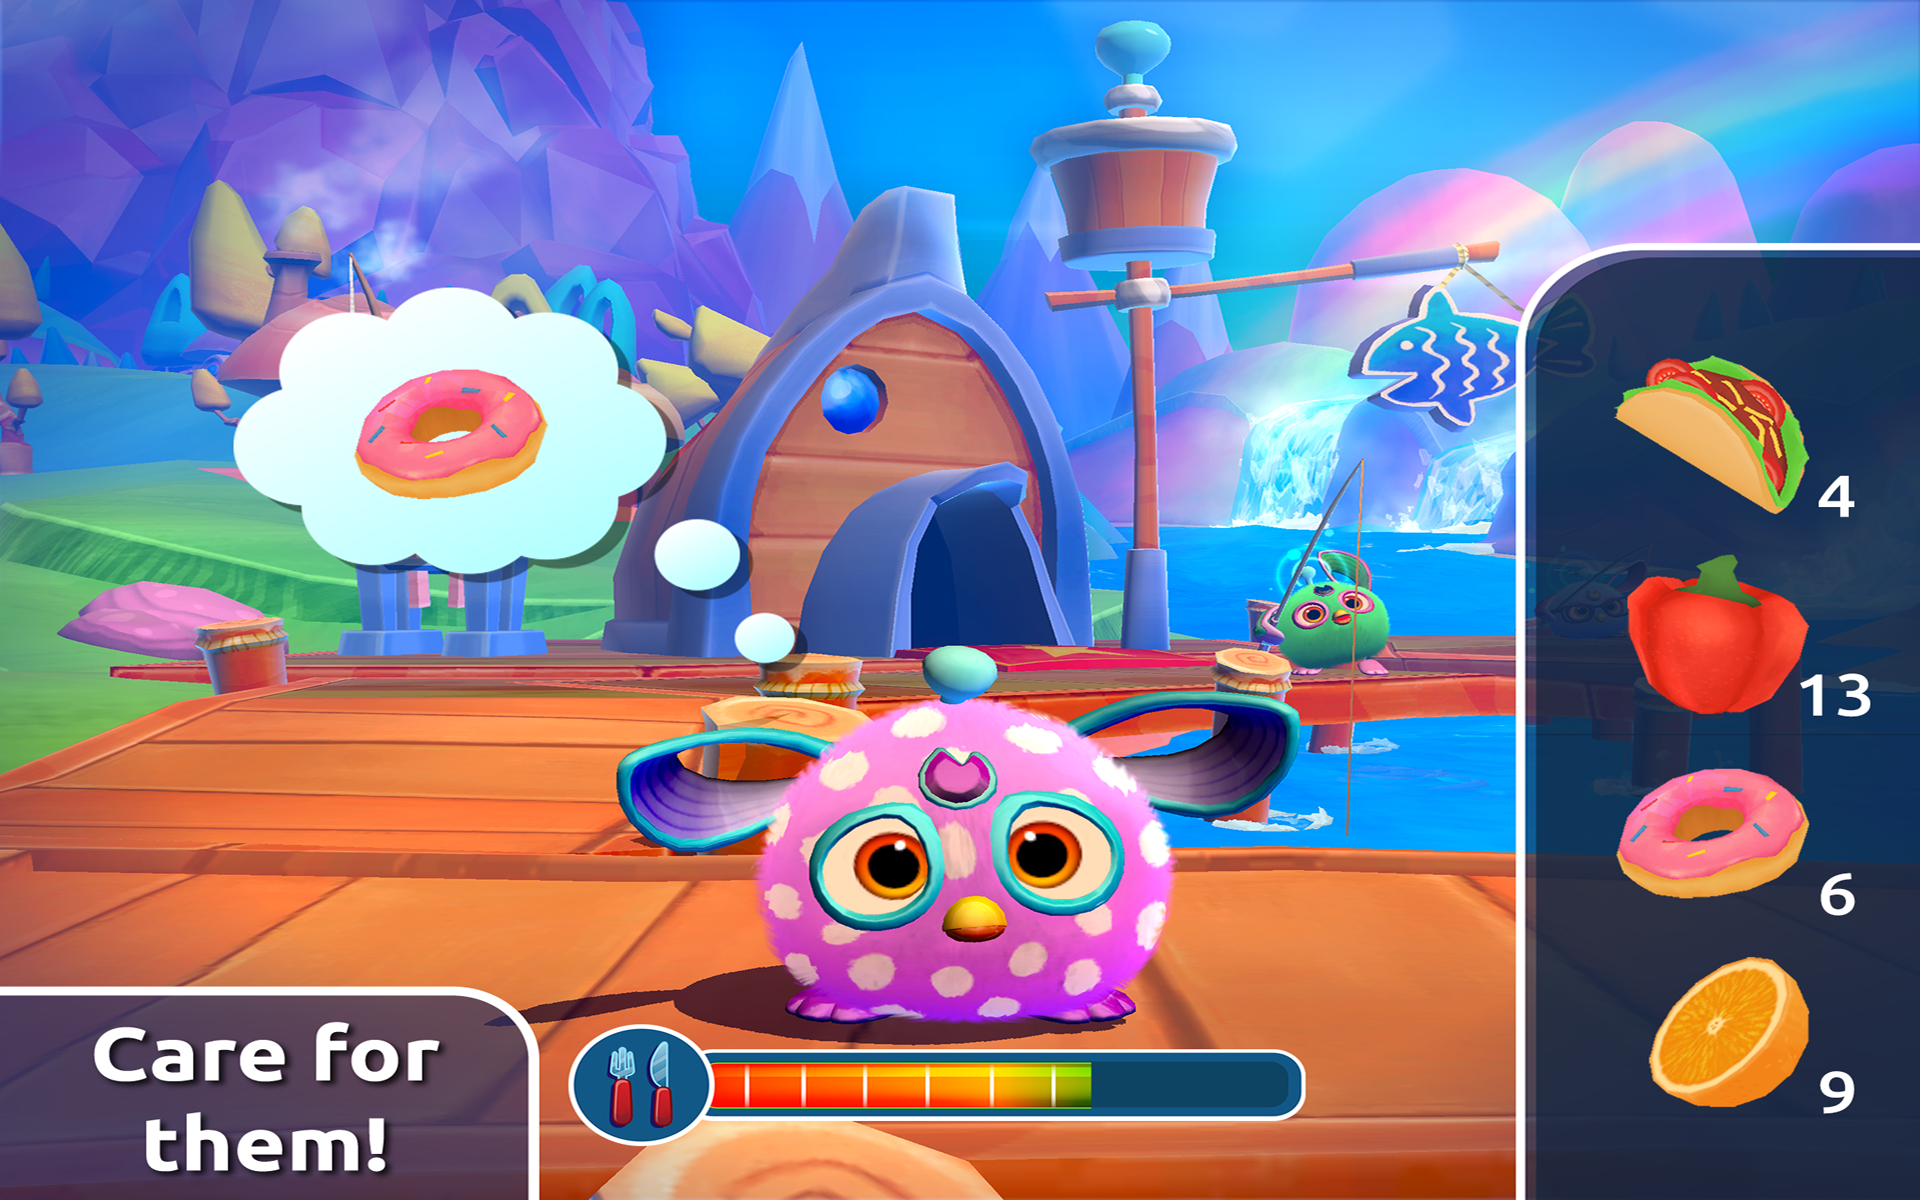 furby connect world